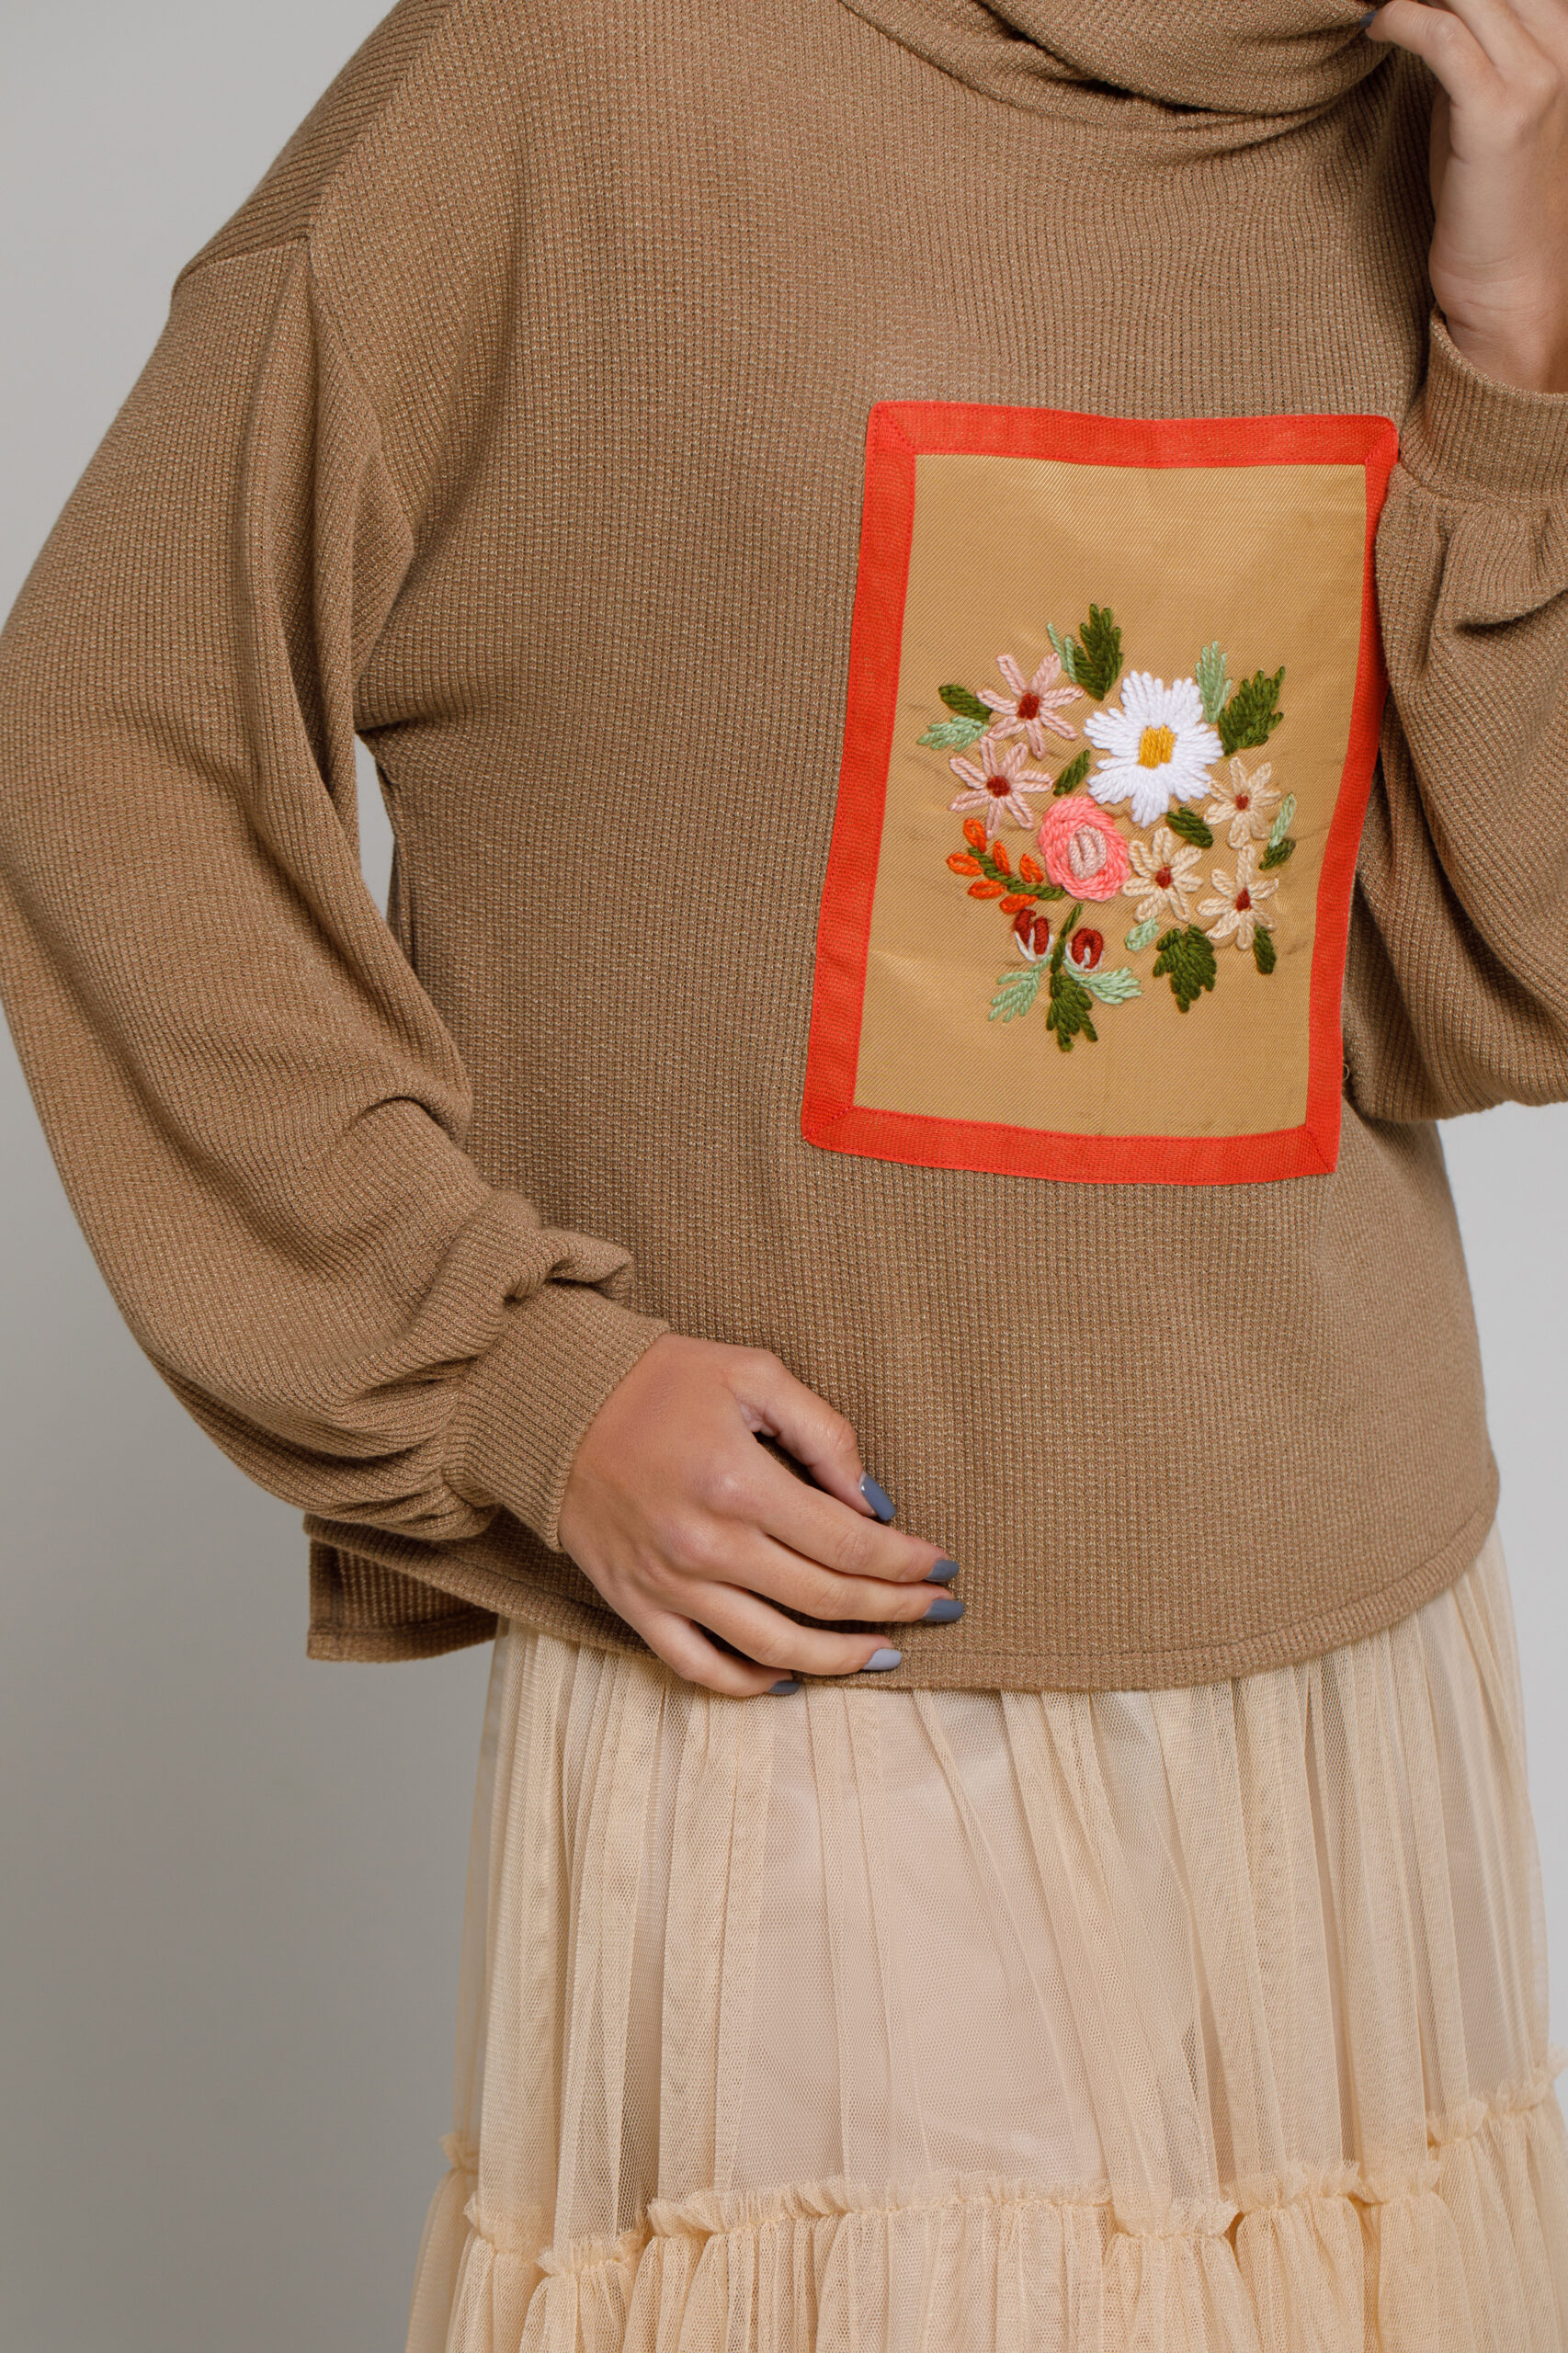 BRAND cappuccino sweater with floral embroidery. Natural fabrics, original design, handmade embroidery